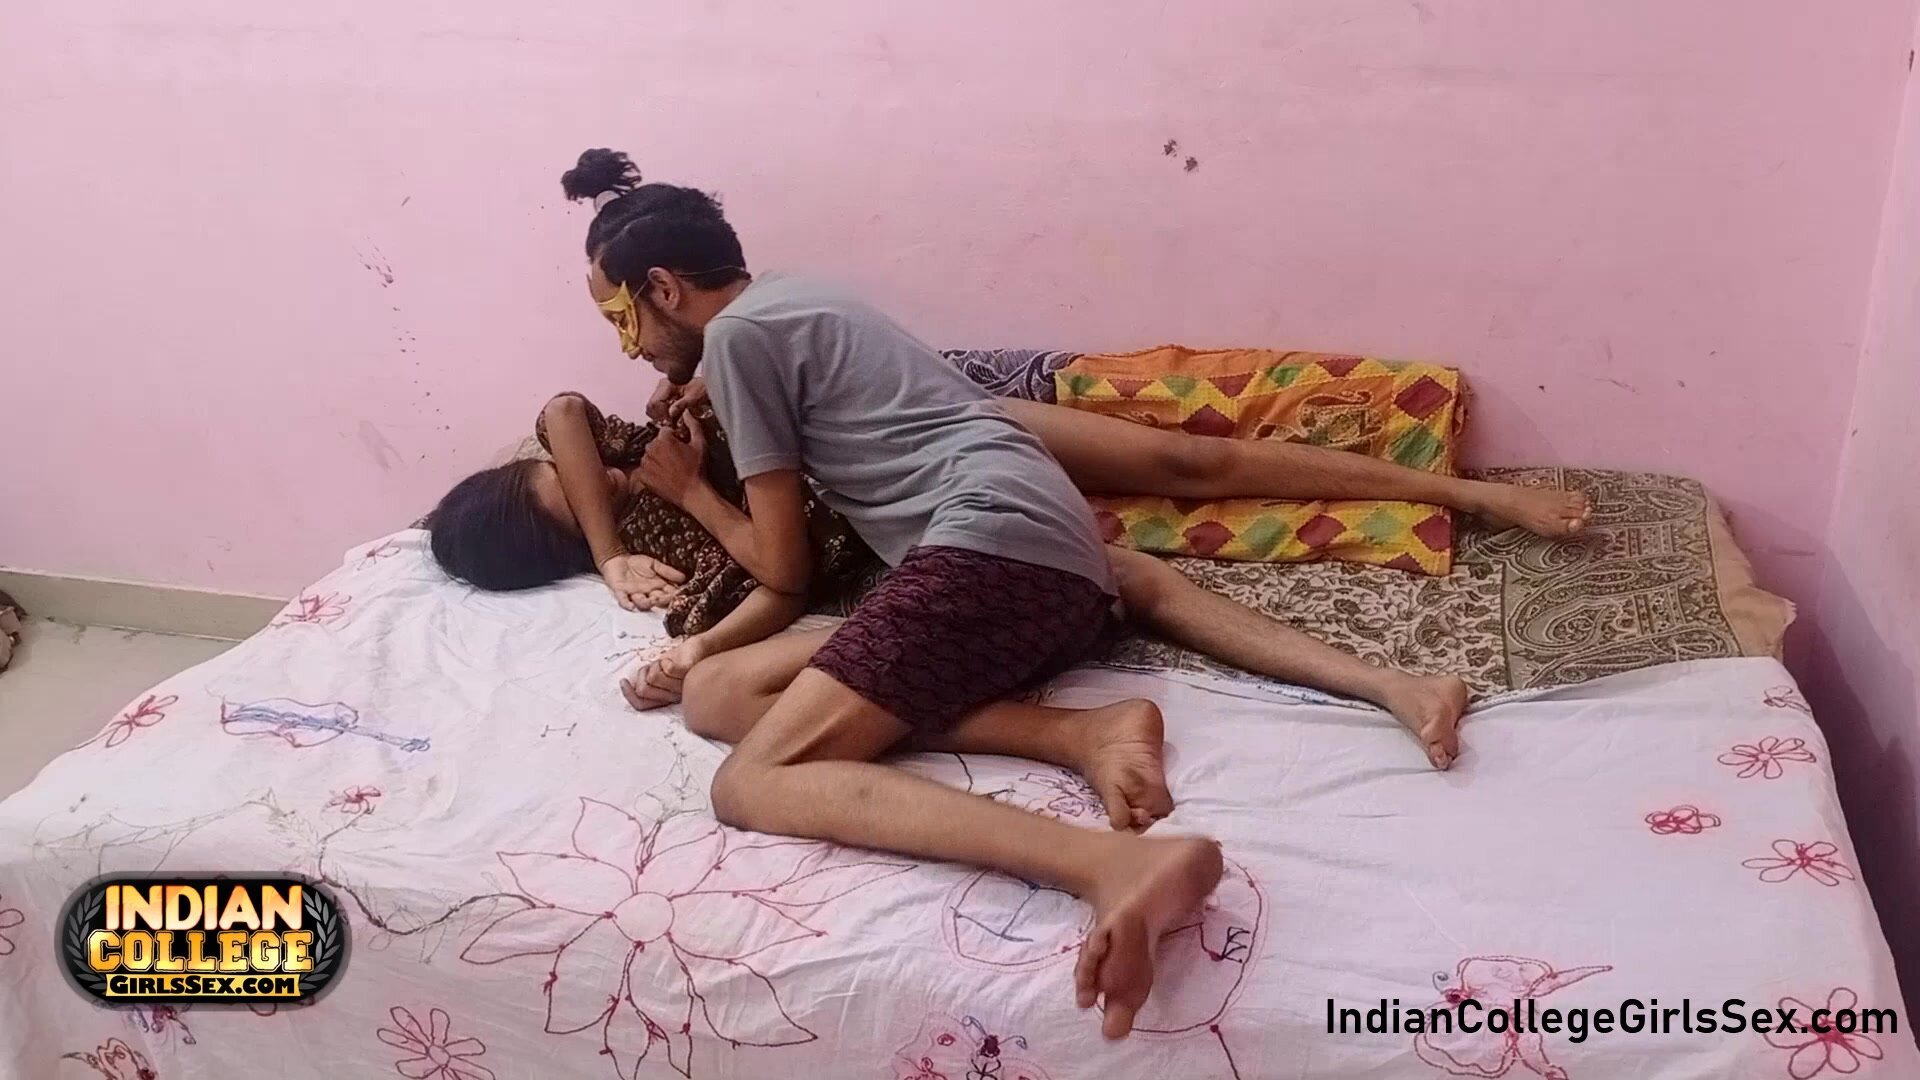 Amateur Indian skinny teen get an anal creampie after a hard desi pussy fucking sex at Fapnado photo image